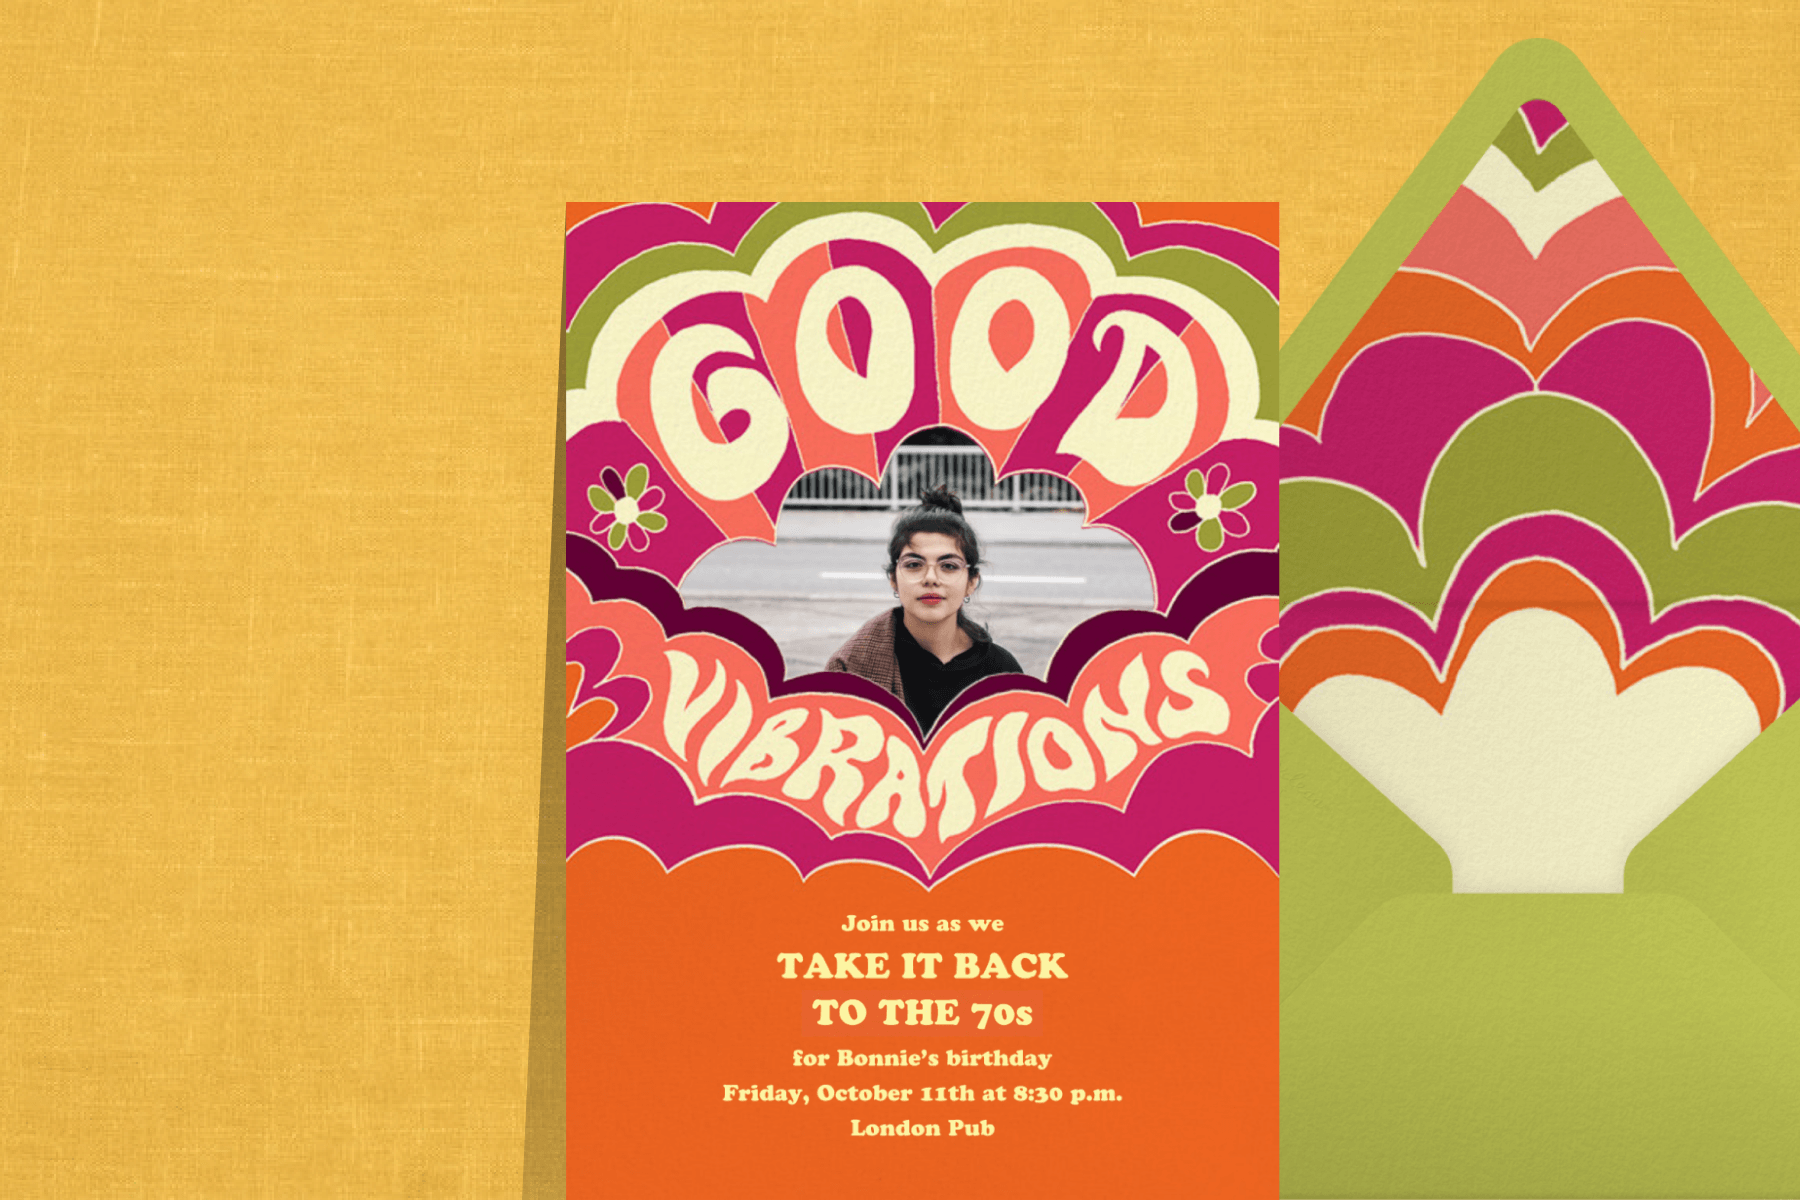 A party invitation in bright colors with the words “Good Vibrations” illustrated.